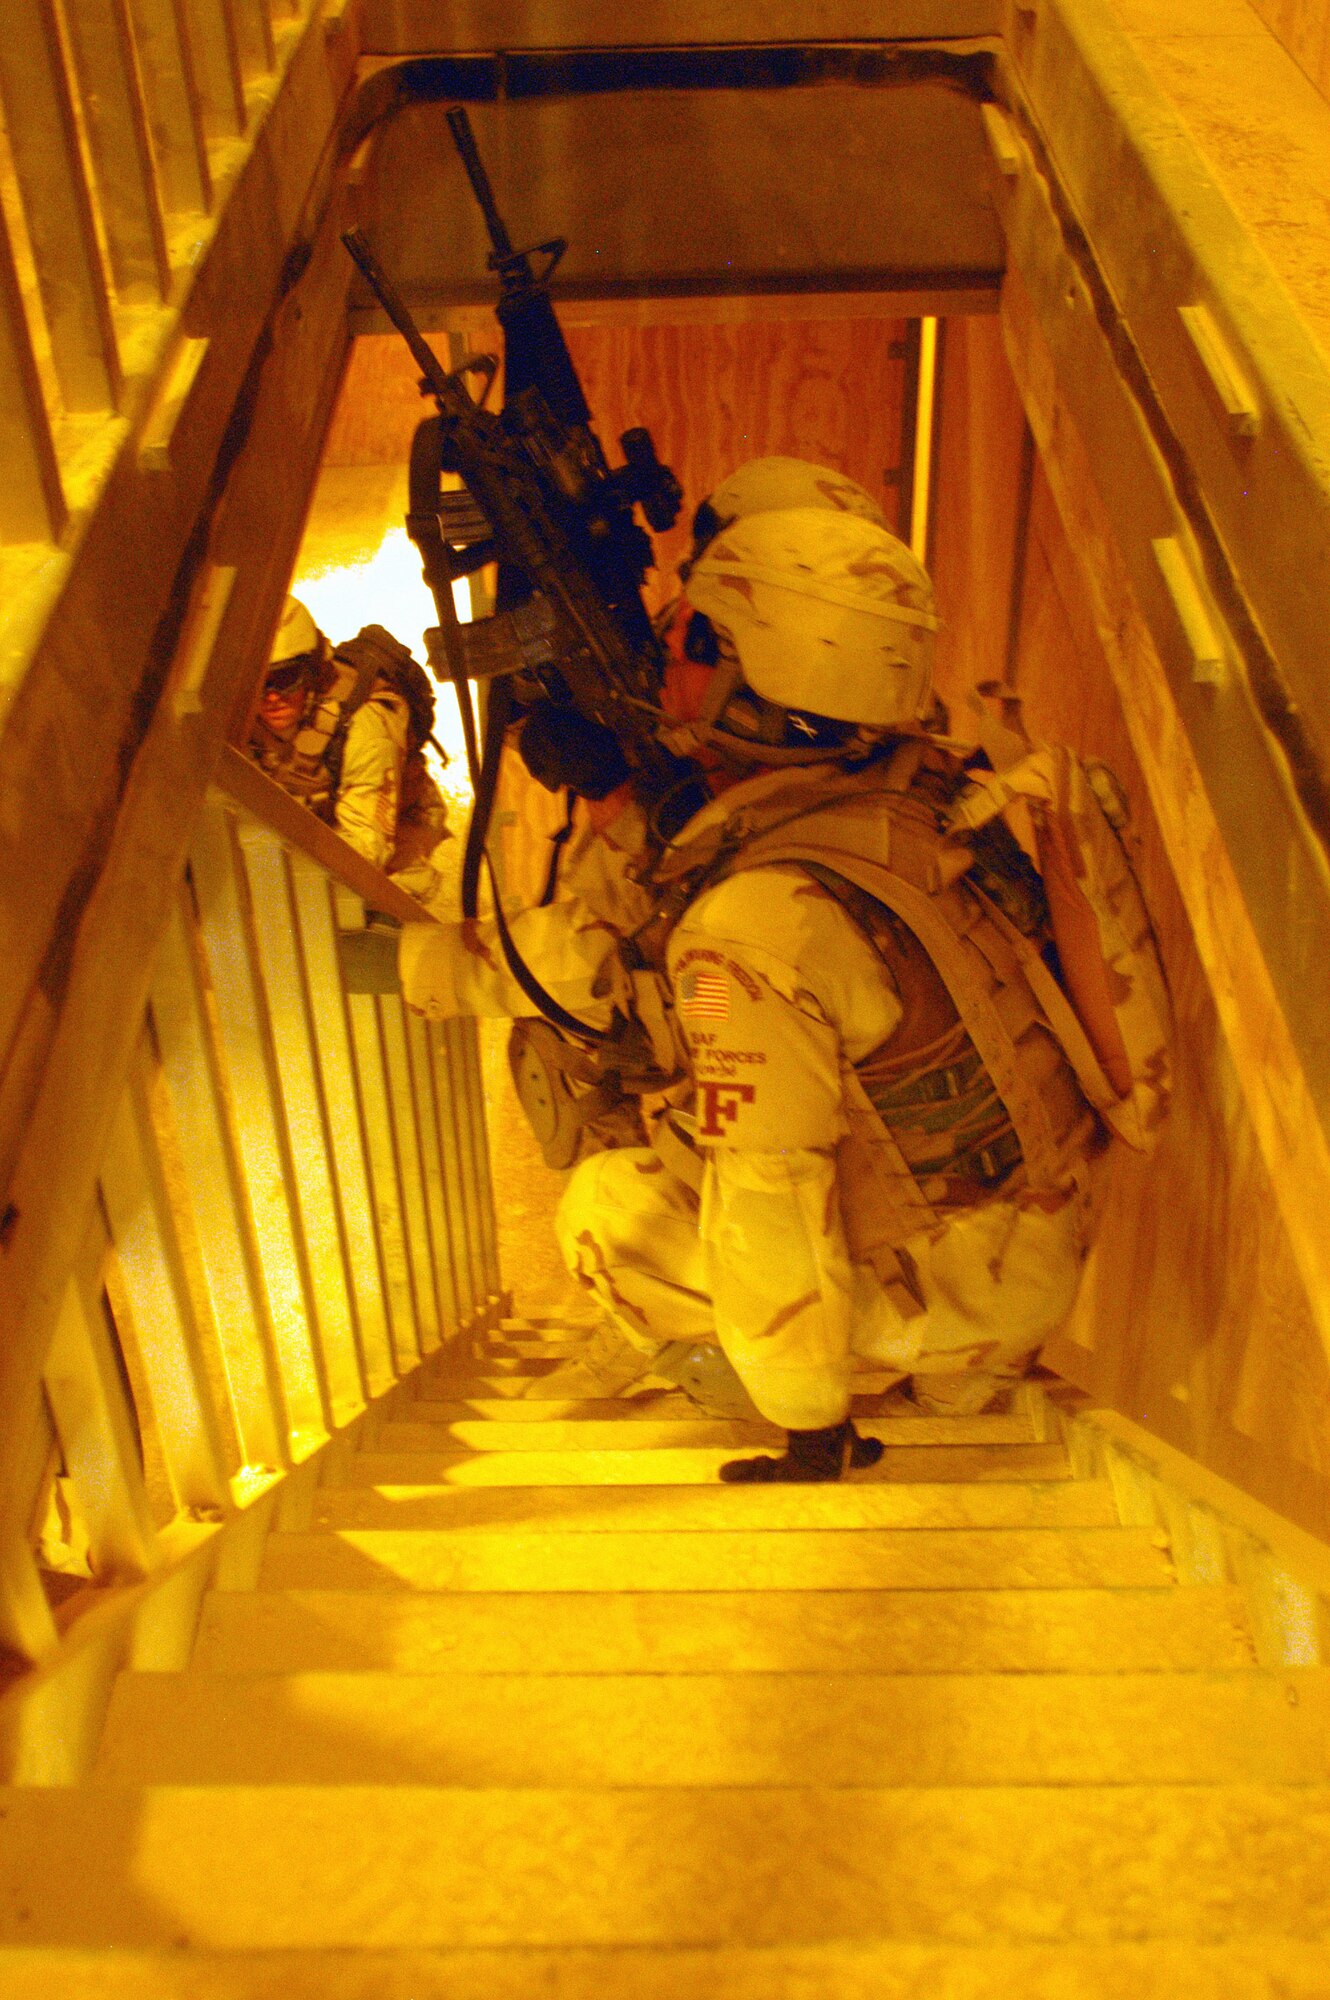 Senior Airmen Victor Morales (foreground) and Charles Coles check a stairwell for simulated enemy forces during Military Operations in Urban Terrain training at Bagram Air Base, Afghanistan, on Tuesday, May 9, 2006. The facility, run by the U.S. Army here, is a mock Afghan village designed to train and test U.S. and coalition forces' skills in close combat. The Airmen are with the 455th Expeditionary Security Forces Squadron. (U.S. Air Force photo/Maj. David Kurle)